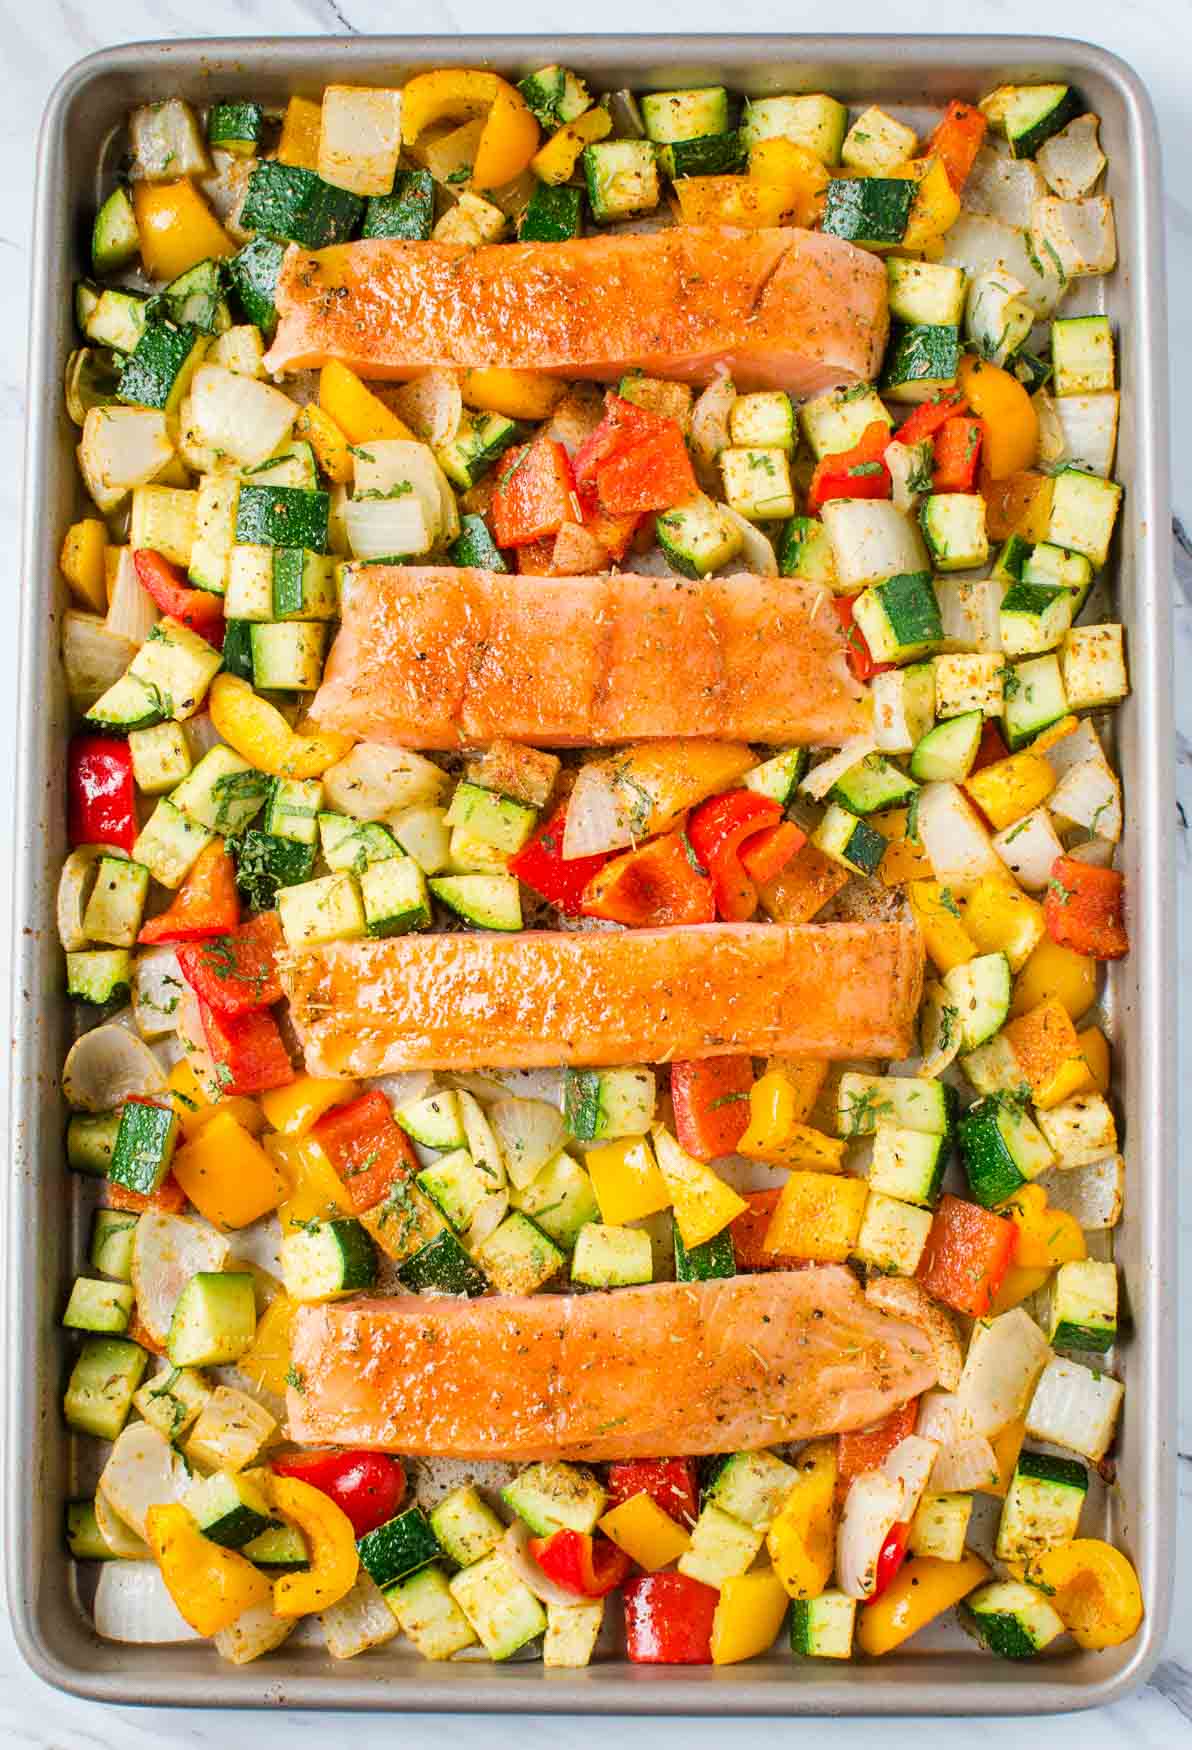 Salmon and vegetables baked together in one pan for an easy, healthy and quick dinner.